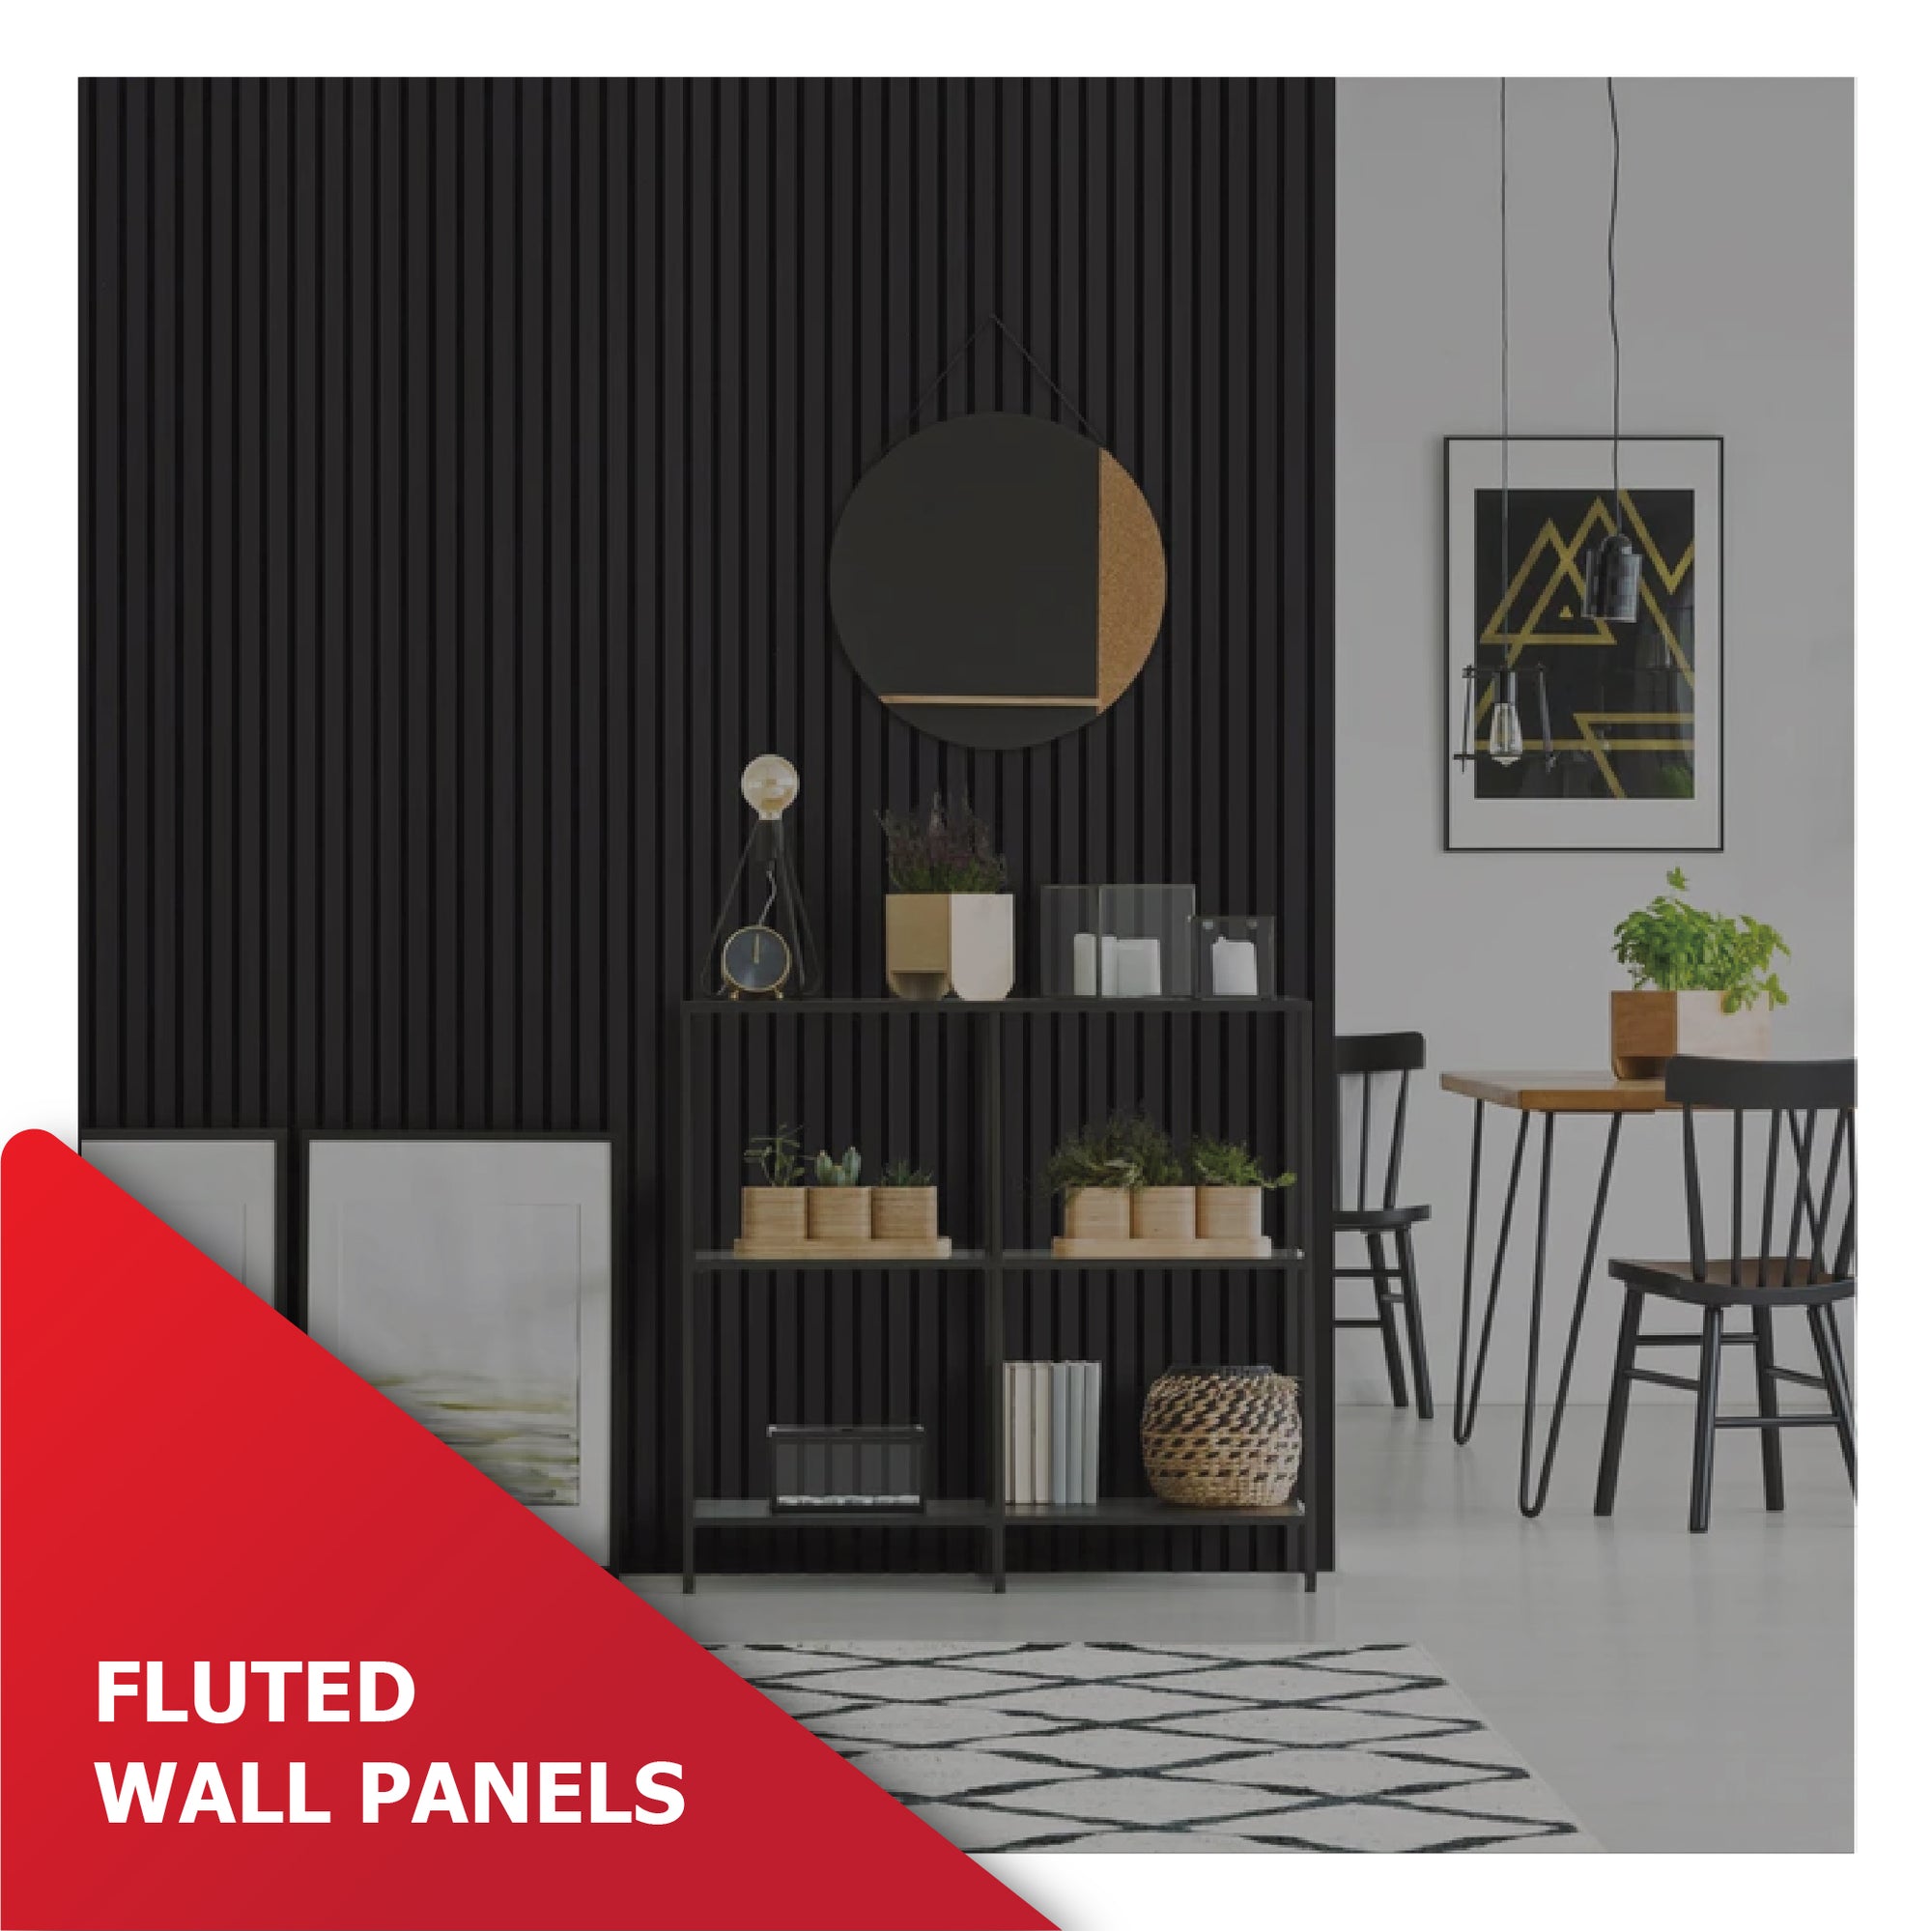 Fluted Wall Panels | Category